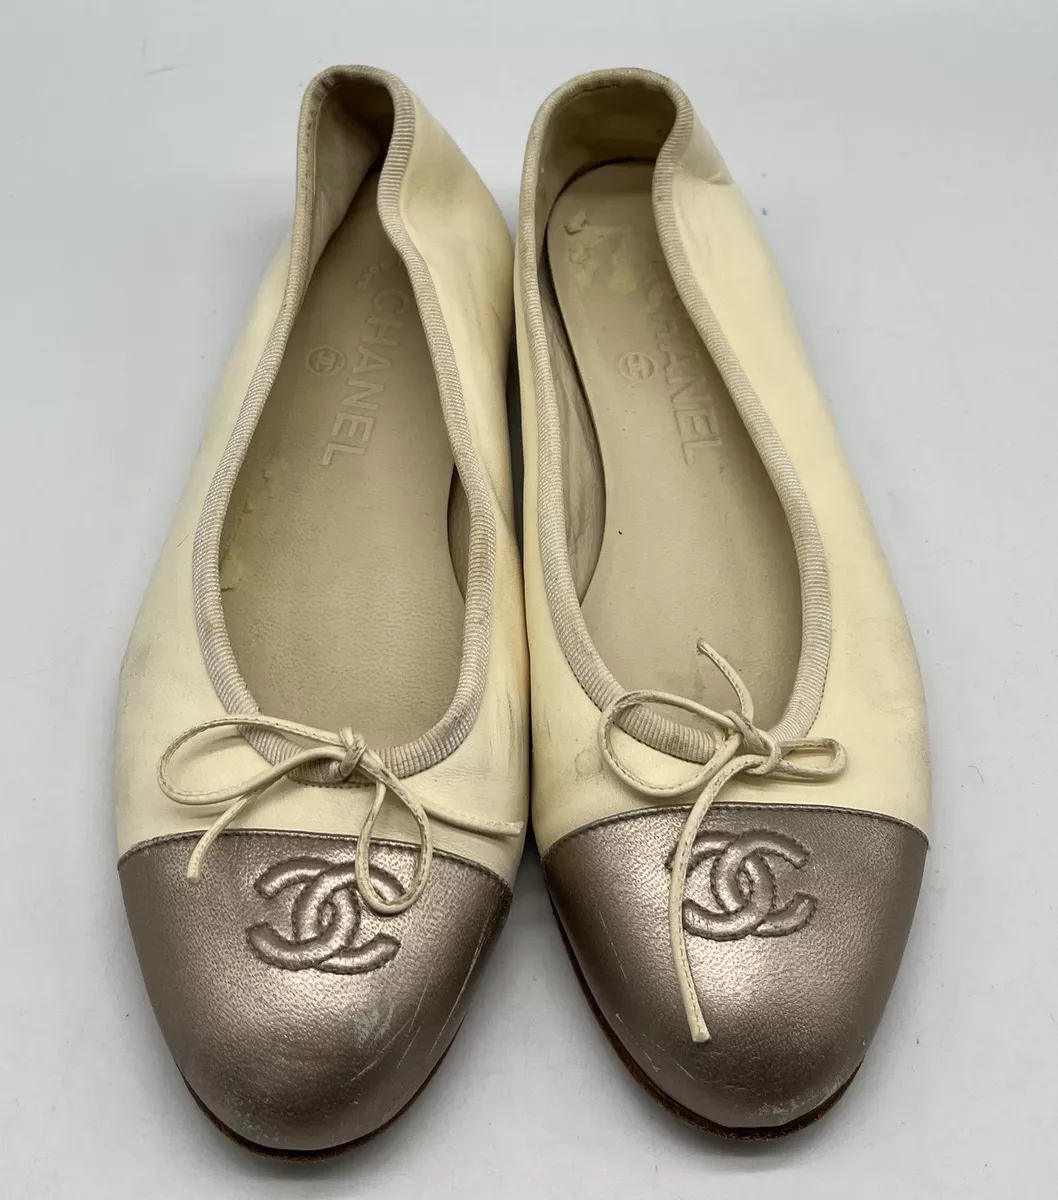 Chanel Two-Tone Leather CC Cap Toe Ballet Flat in Off-White/Pewter sz 37